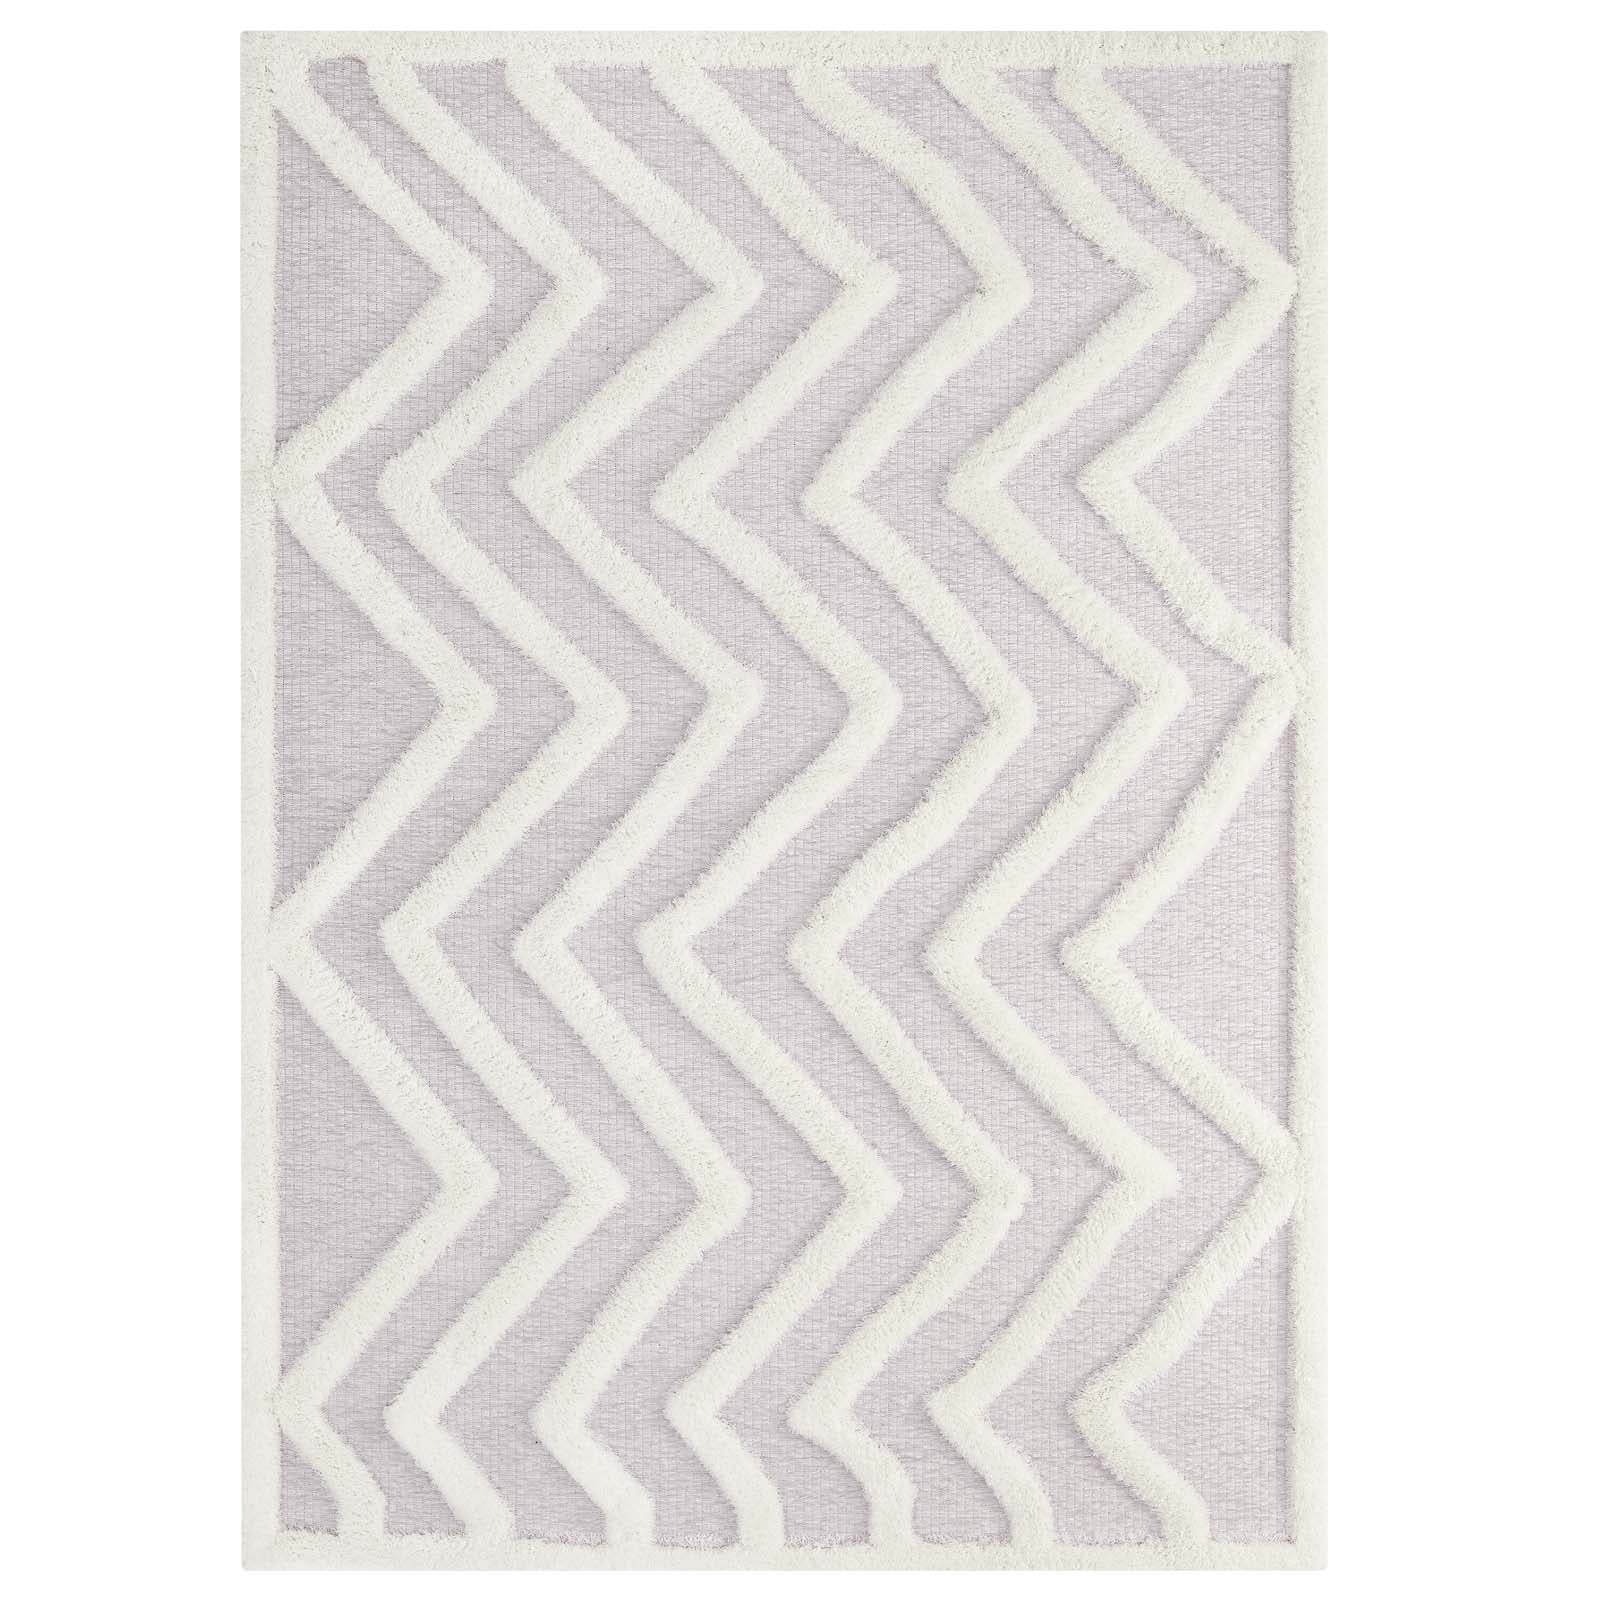 Whimsical Pathway Abstract Chevron 5x8 Shag Area Rug - East Shore Modern Home Furnishings